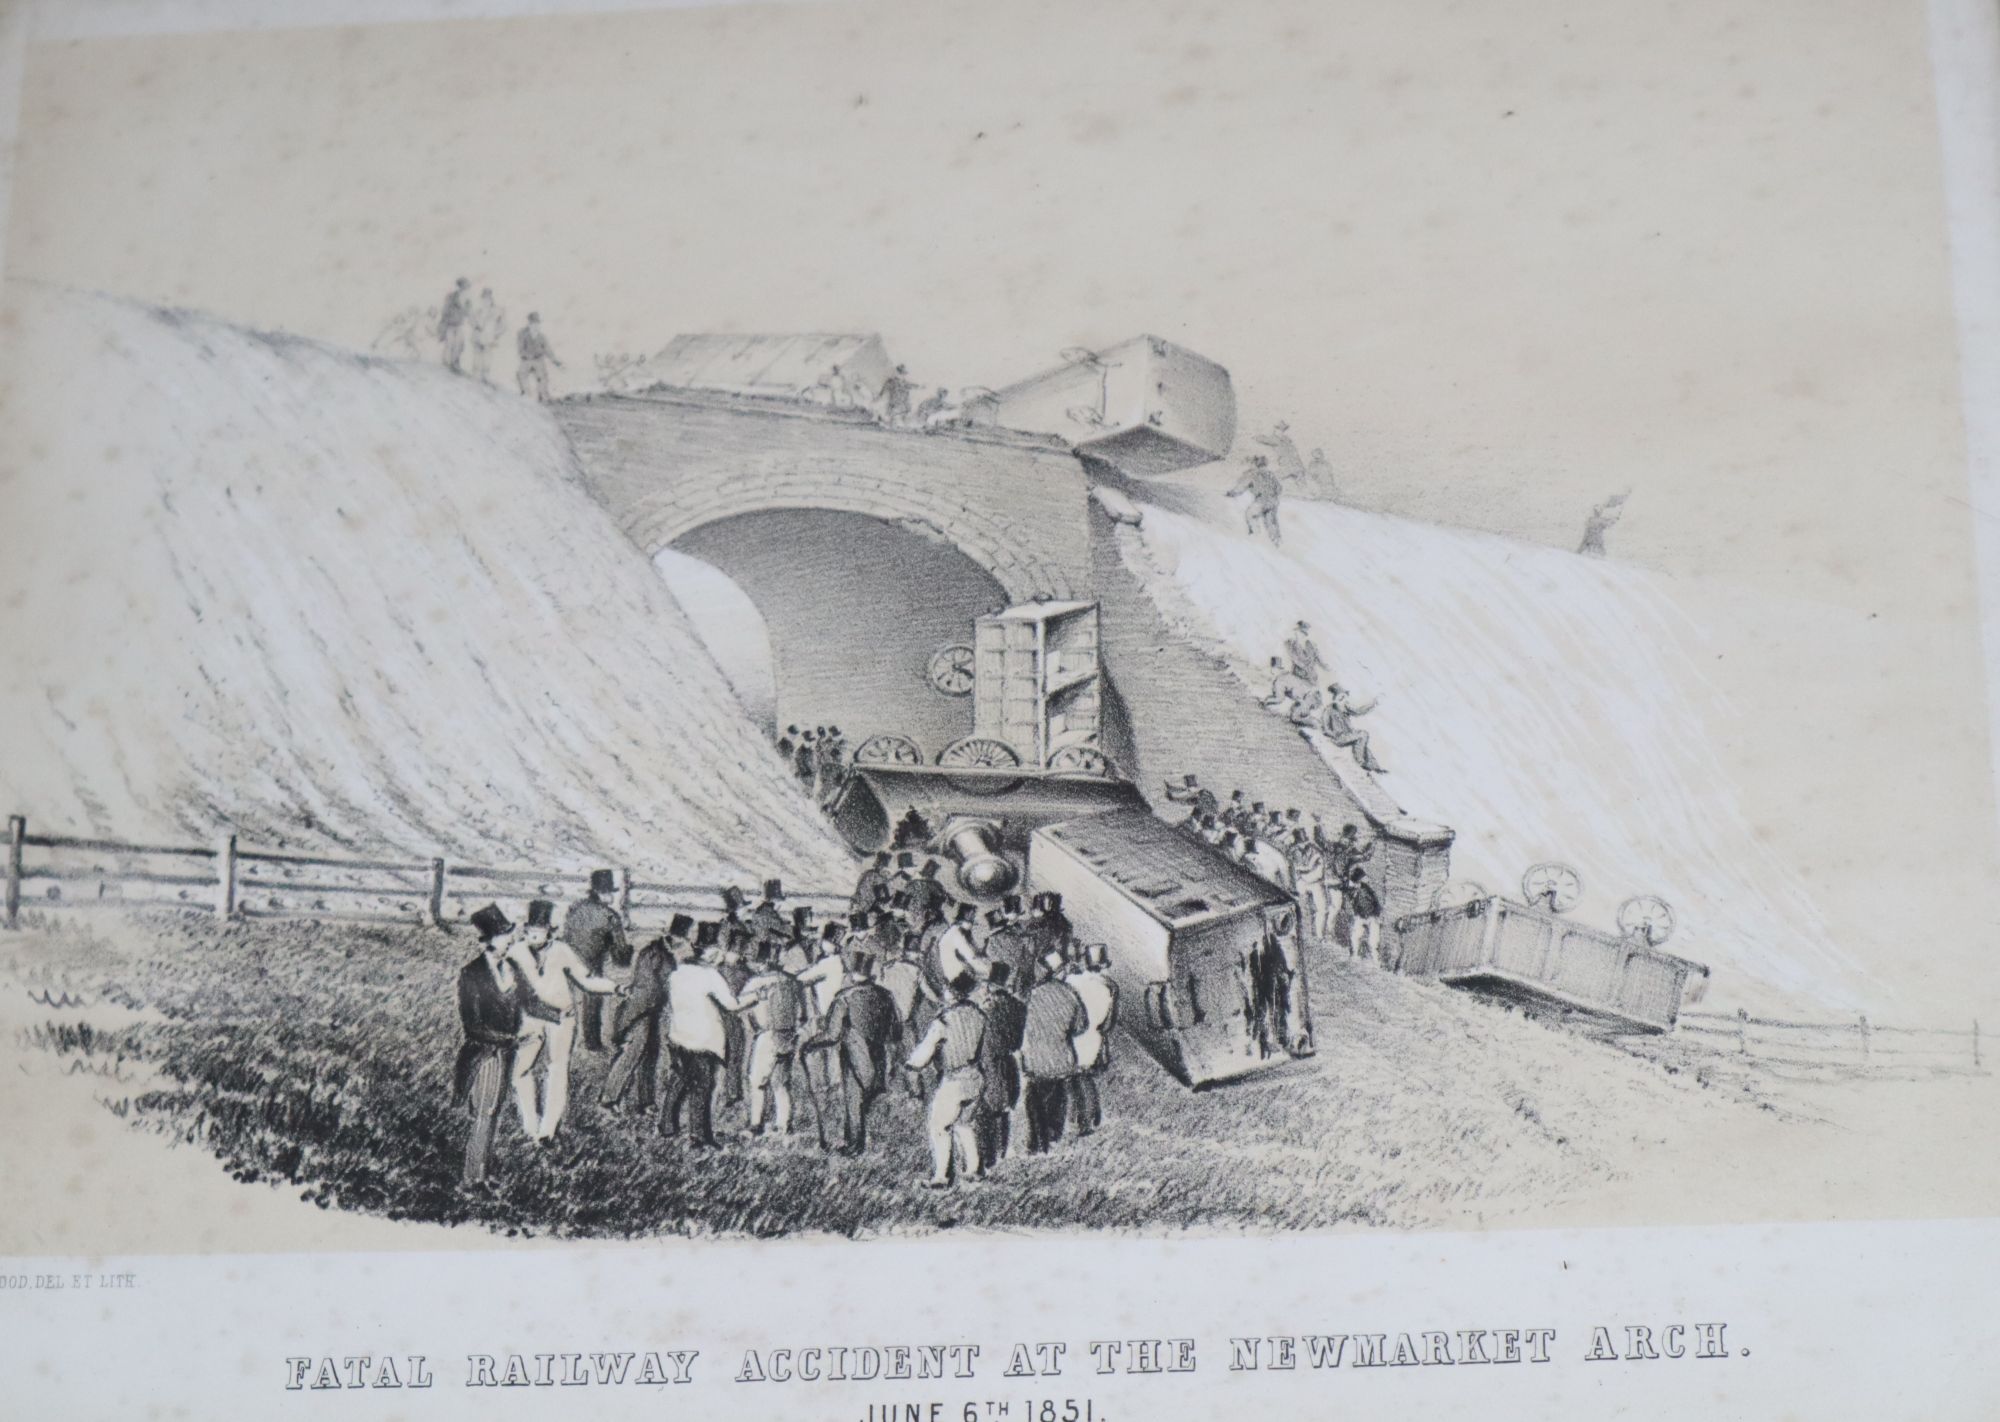 A group of assorted 19th century and later watercolours and prints, depicting scenes in and around Lewes, including Fatal Railway Acci